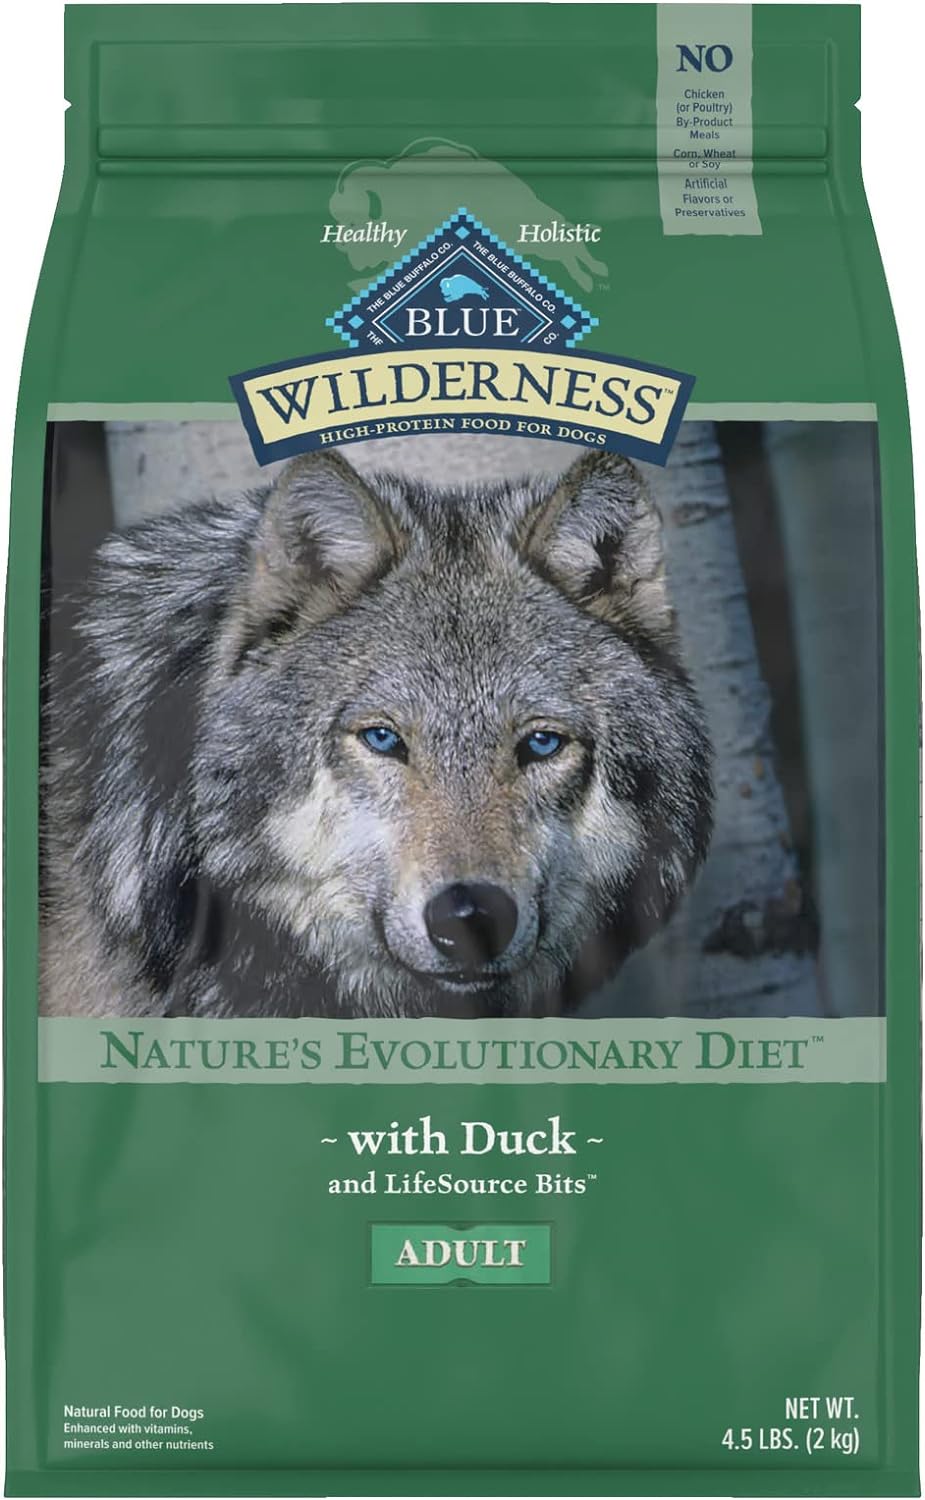 Blue Wilderness Adult Duck Recipe Grain-Free Dry Dog Food – Gallery Image 1